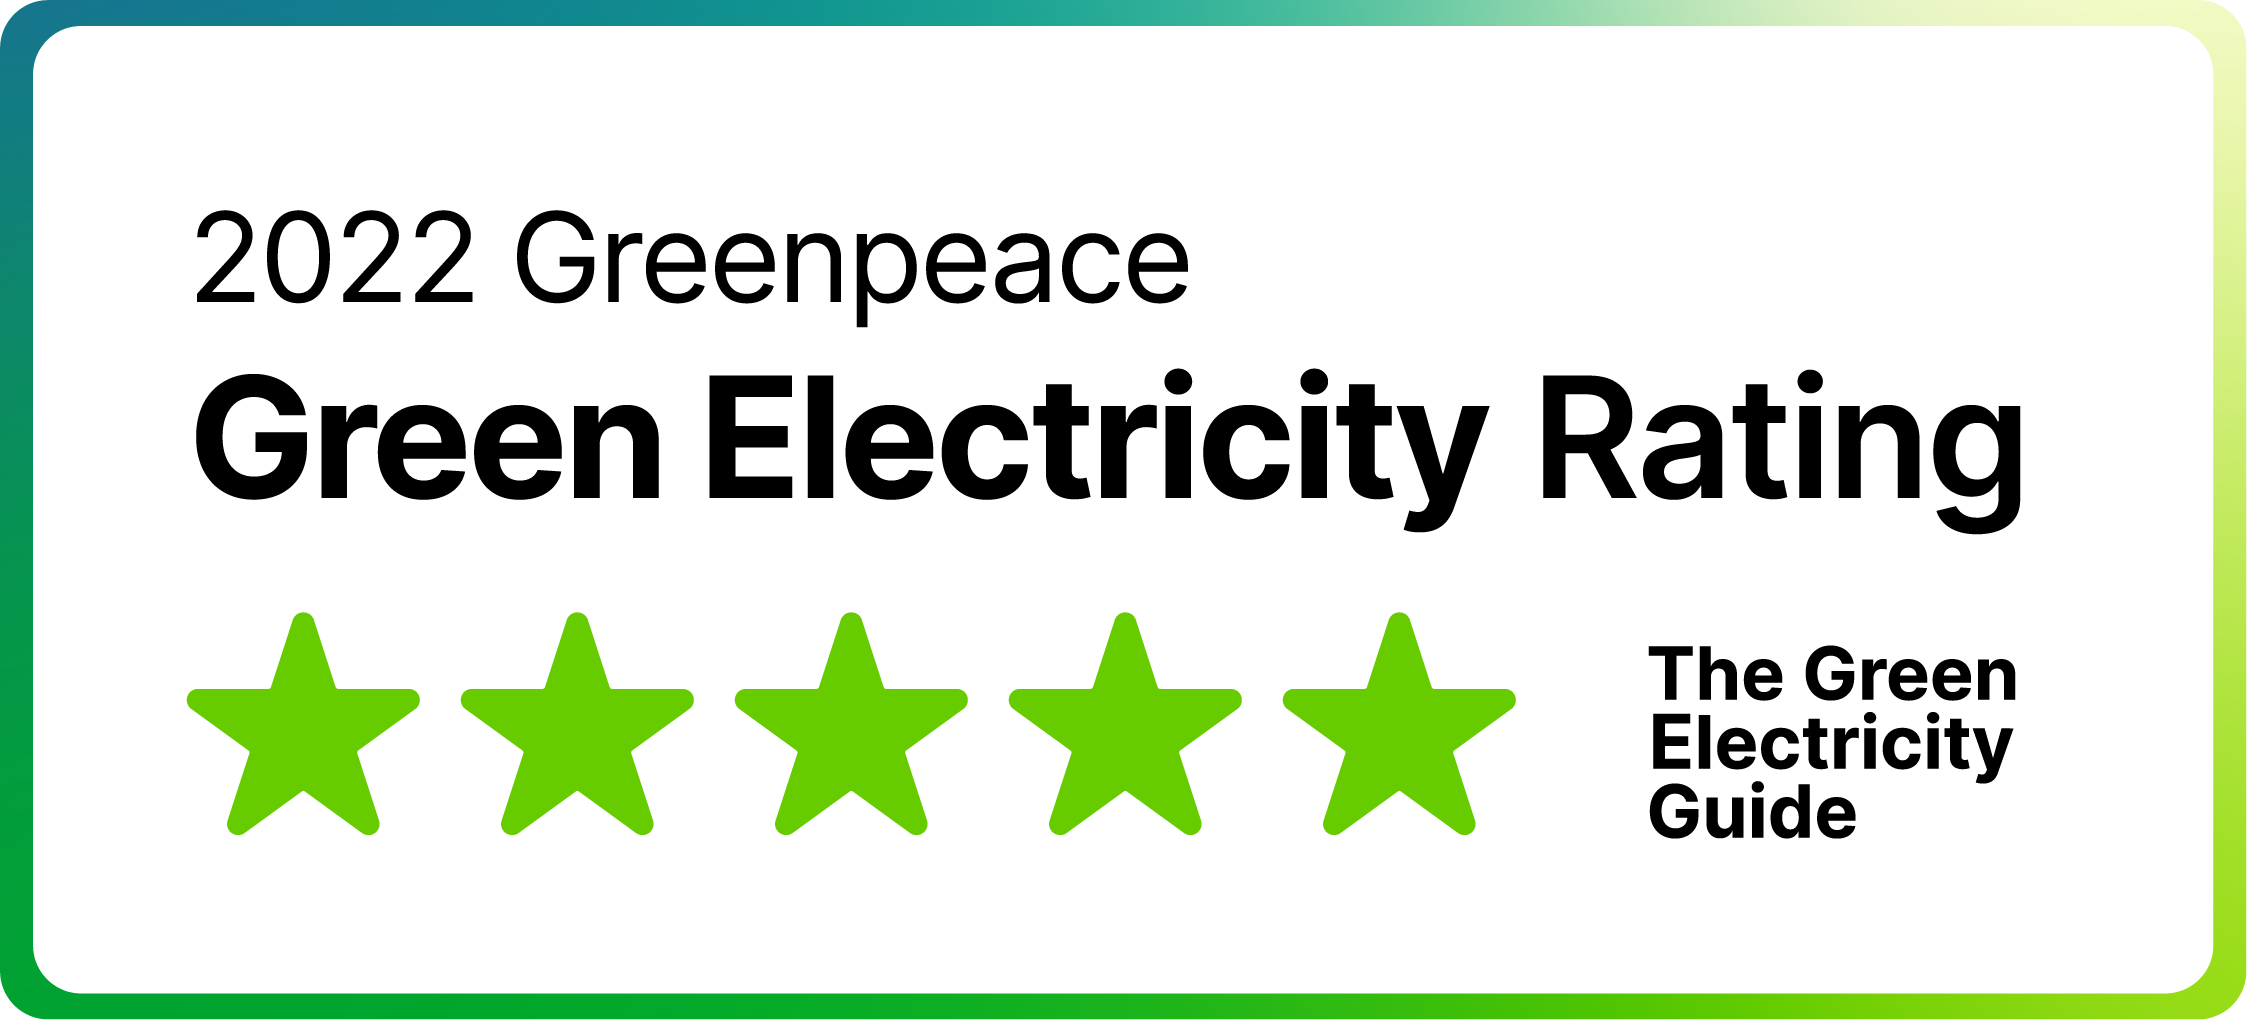 Greenpeace, Green Electricity Guide, 5 star rating energy retailer greenest electricity supplier, powershop provider, best electricity provider, choice